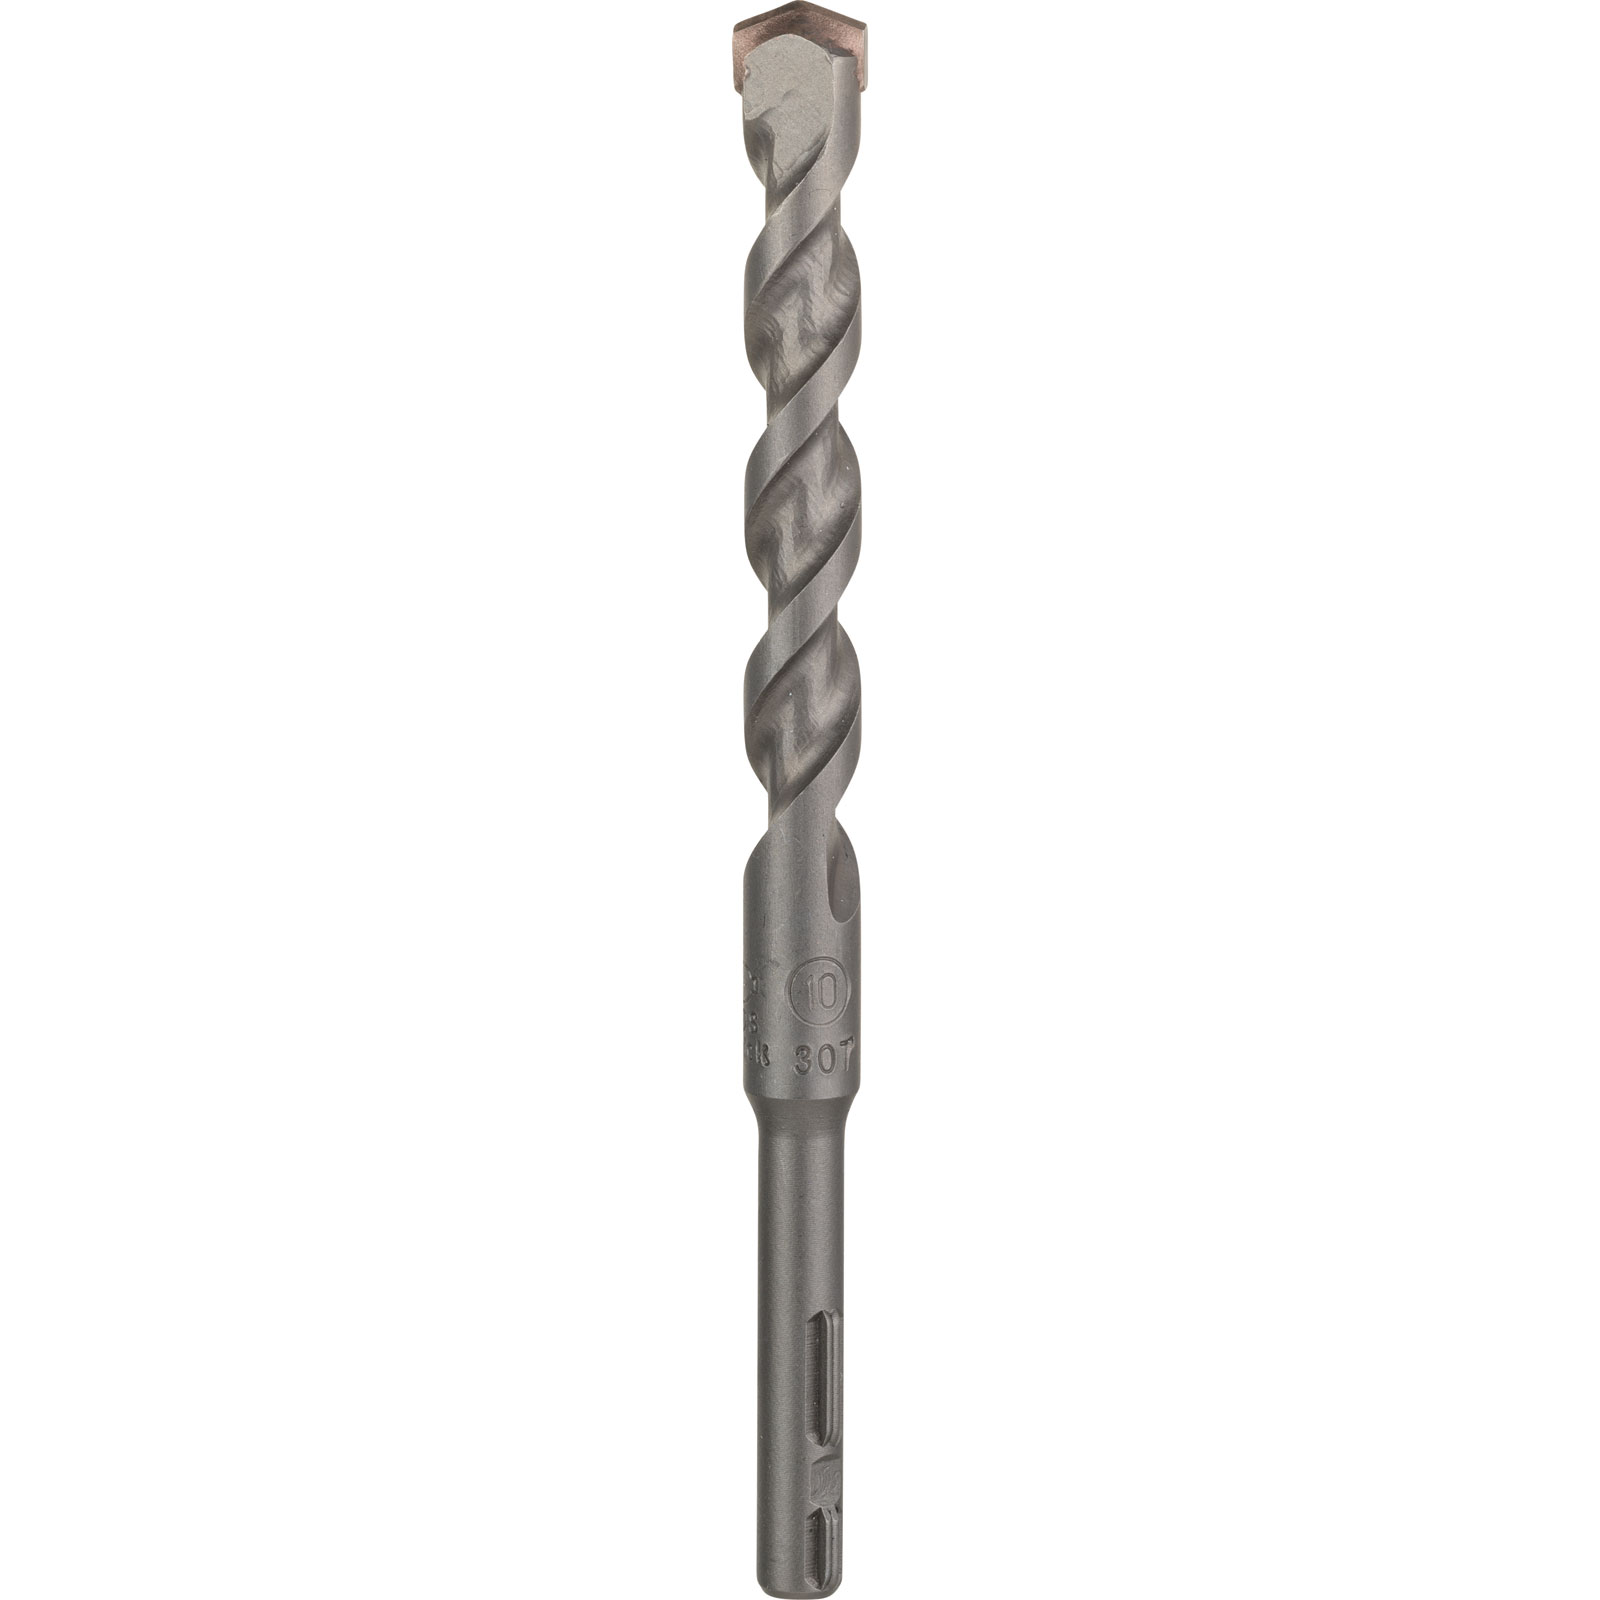 Image of Bosch UNEO SDS Quick Masonary Drill Bit 10mm 120mm Pack of 1